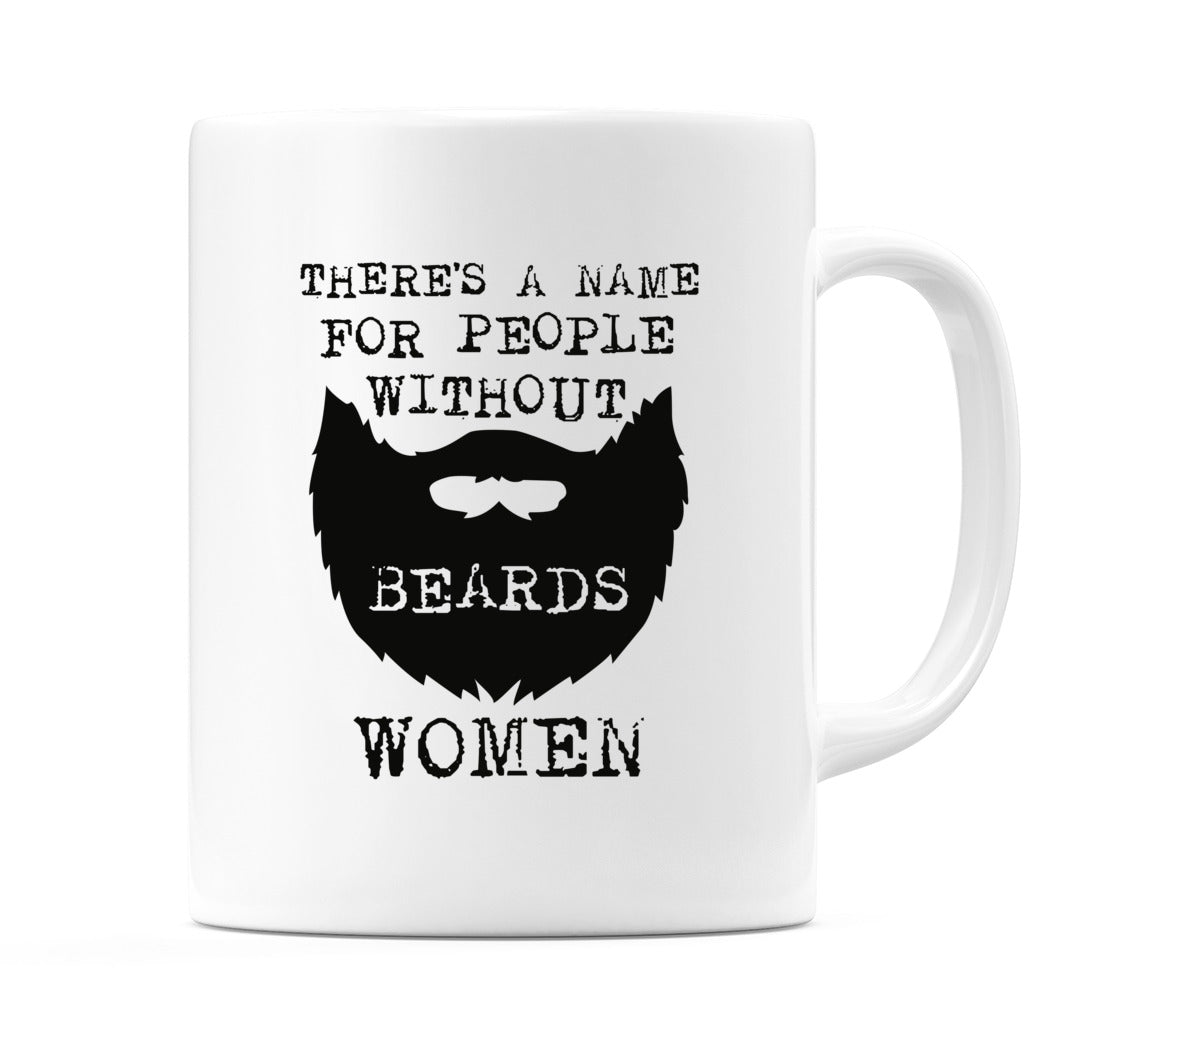 There's a Name For People Without Beards Women Mug